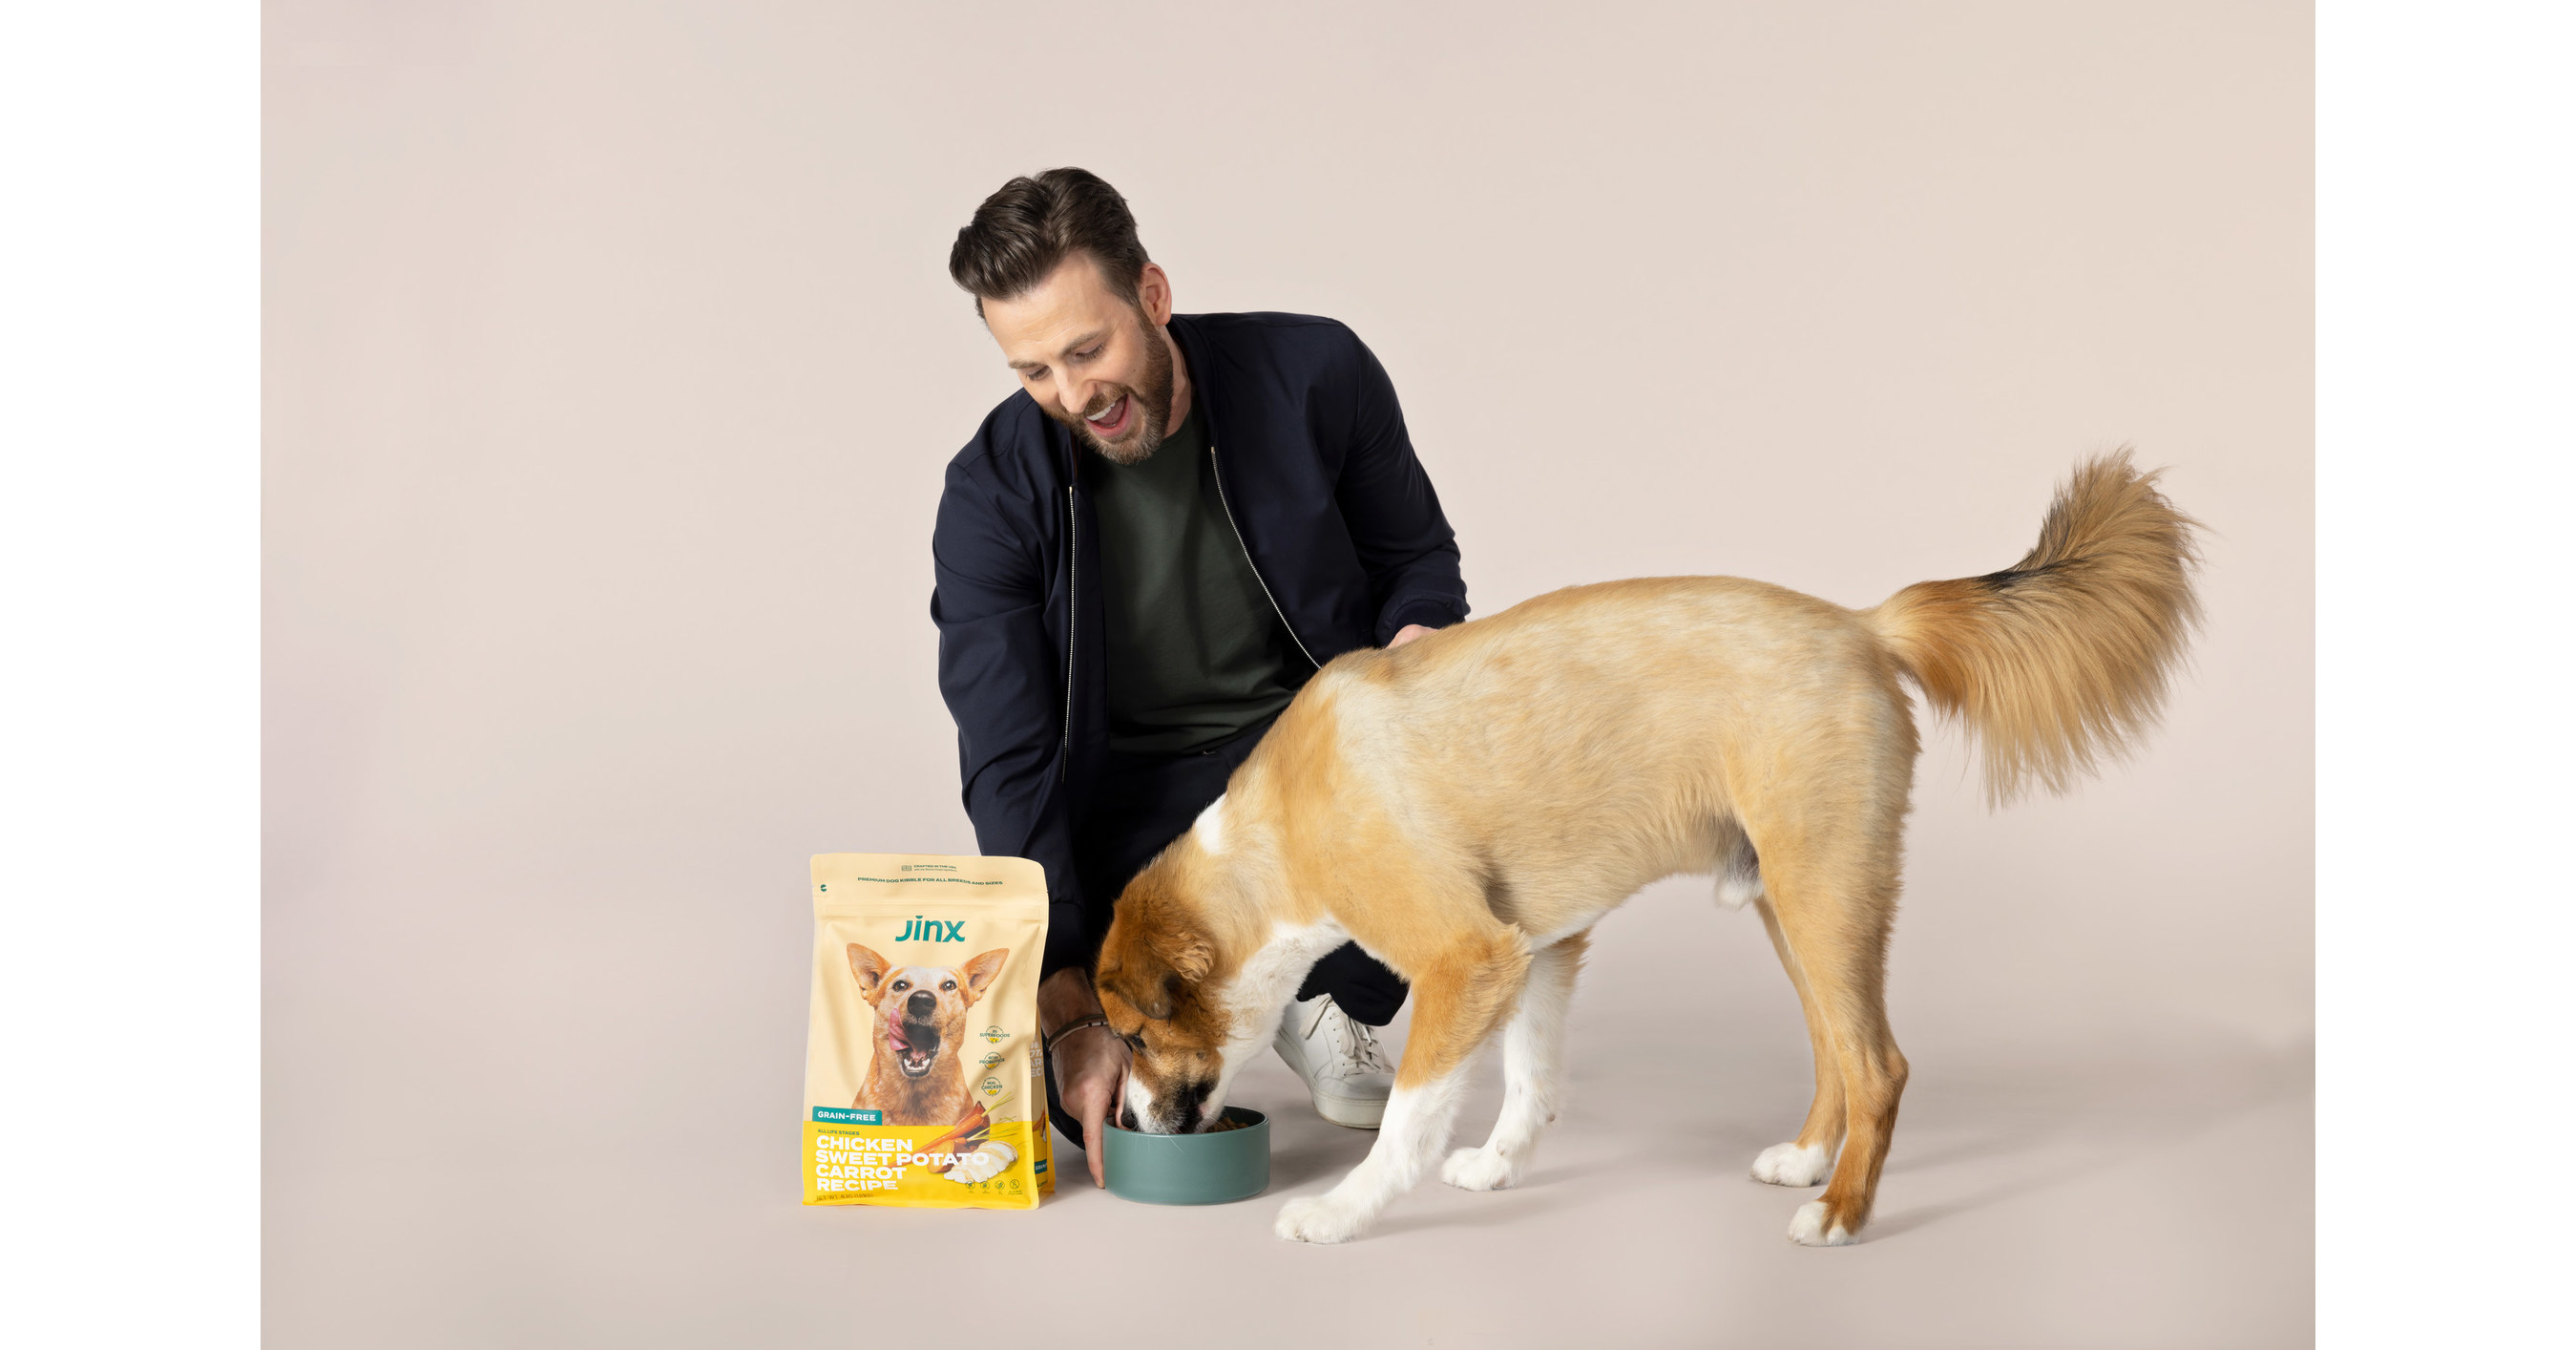 Chris Evans and Jinx are on a mission to make dog food healthier.